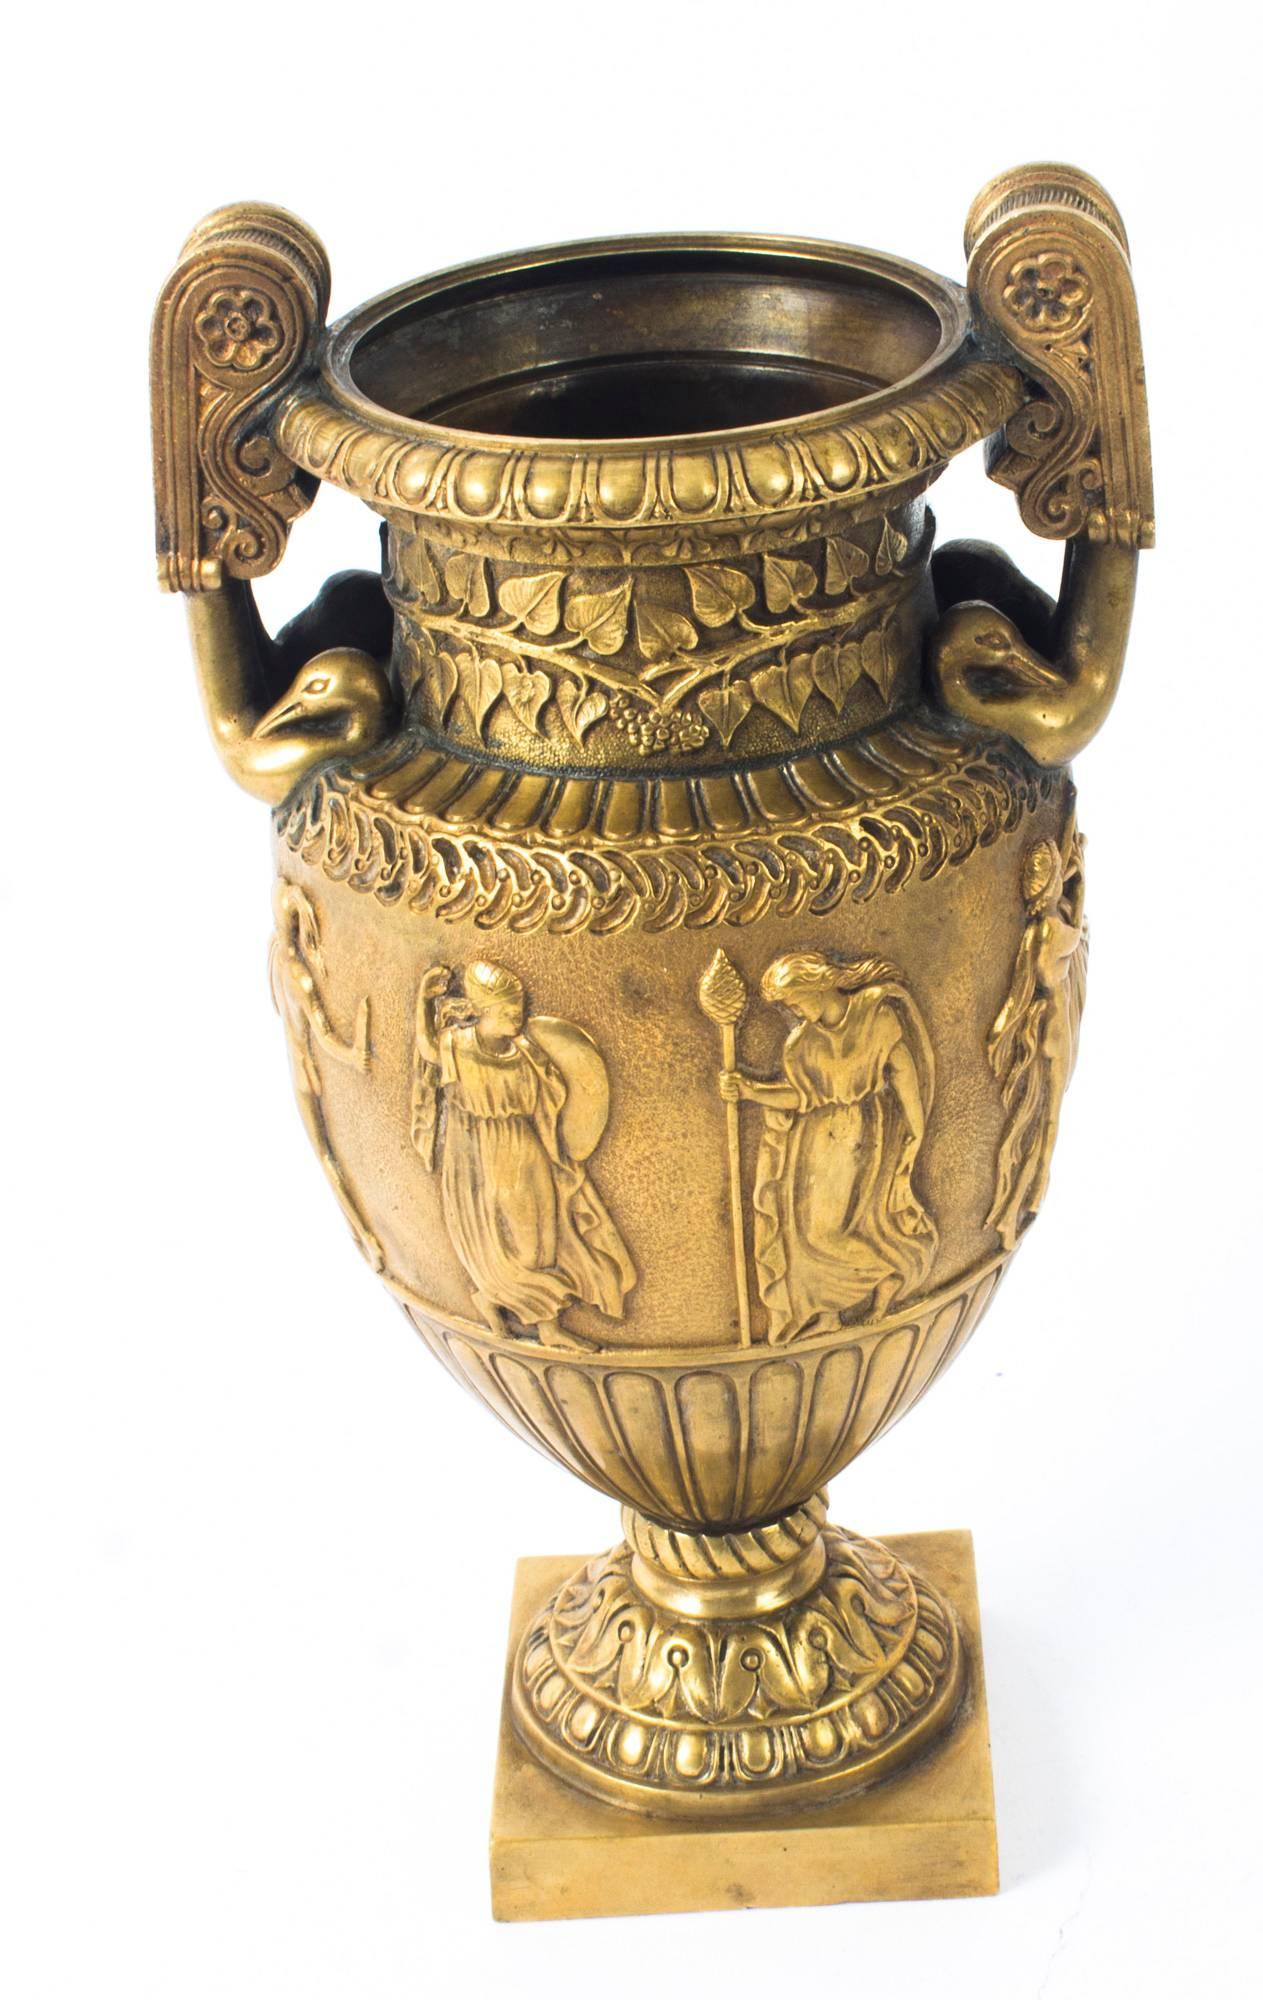 This is a fine antique French Grand Tour gilt bronze Athenian Volute Krater vase, circa 1820 in date.

The elegant vase's body is sculpted with finely detailed low relief decoration consisting of a bacchanalian scene. The neck features a